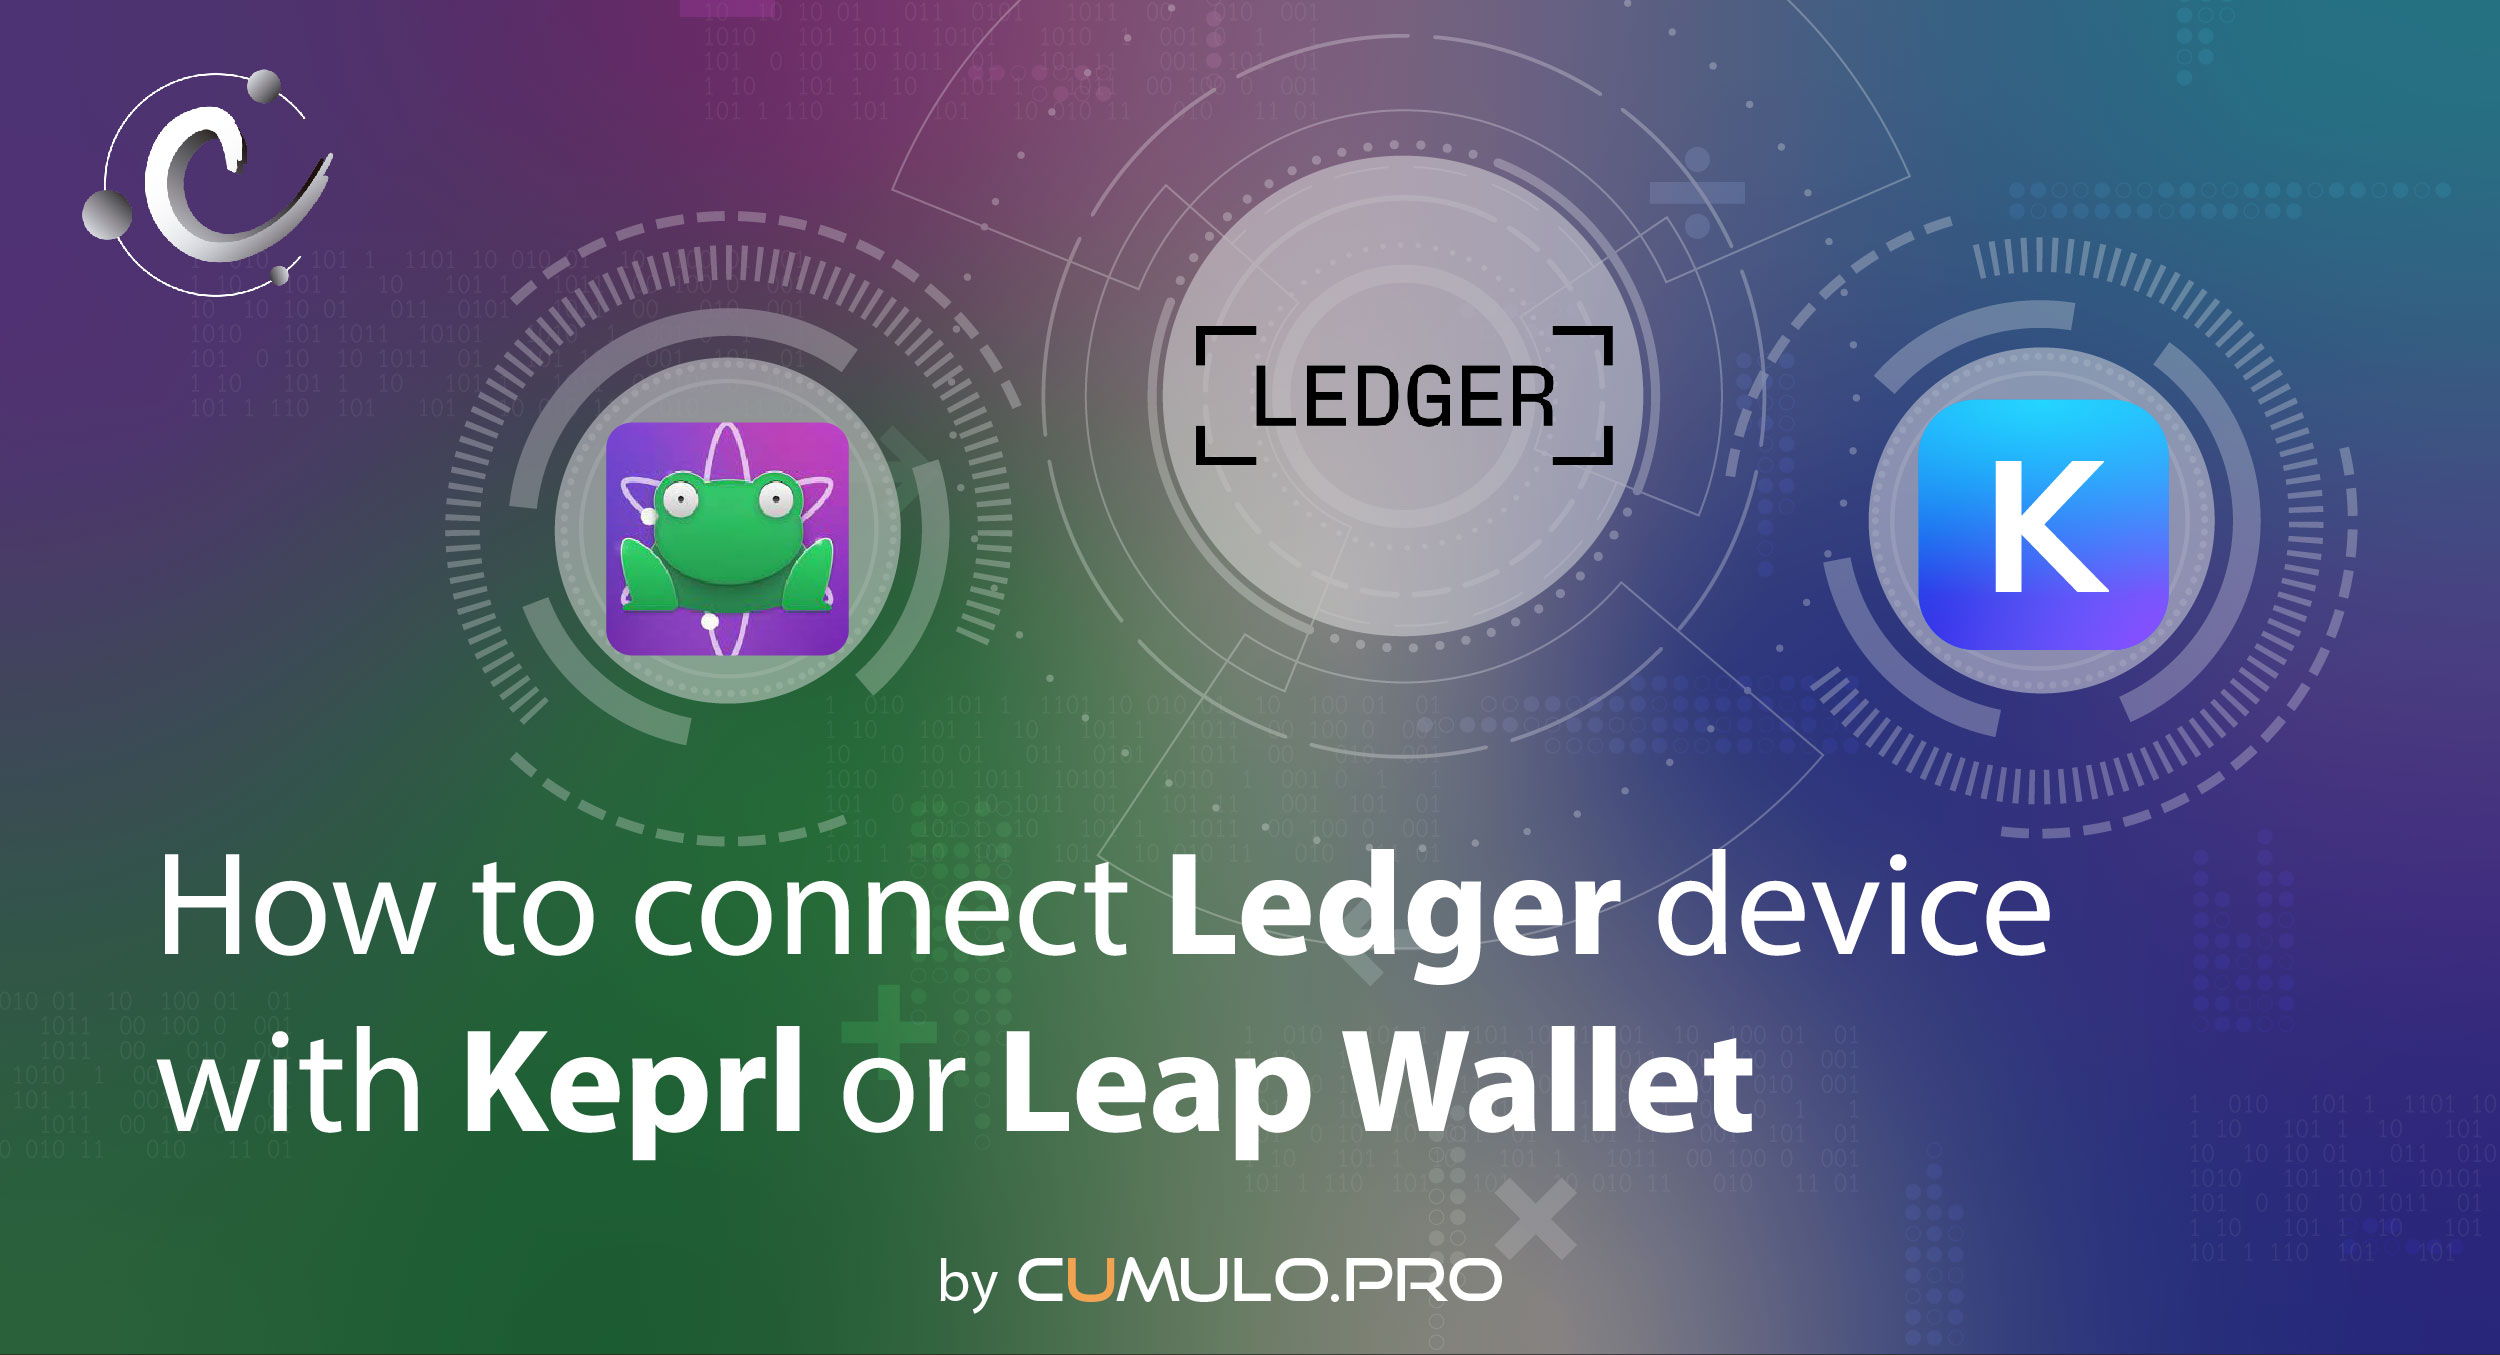 How to connect the Ledger device with Keprl or Leap Wallet